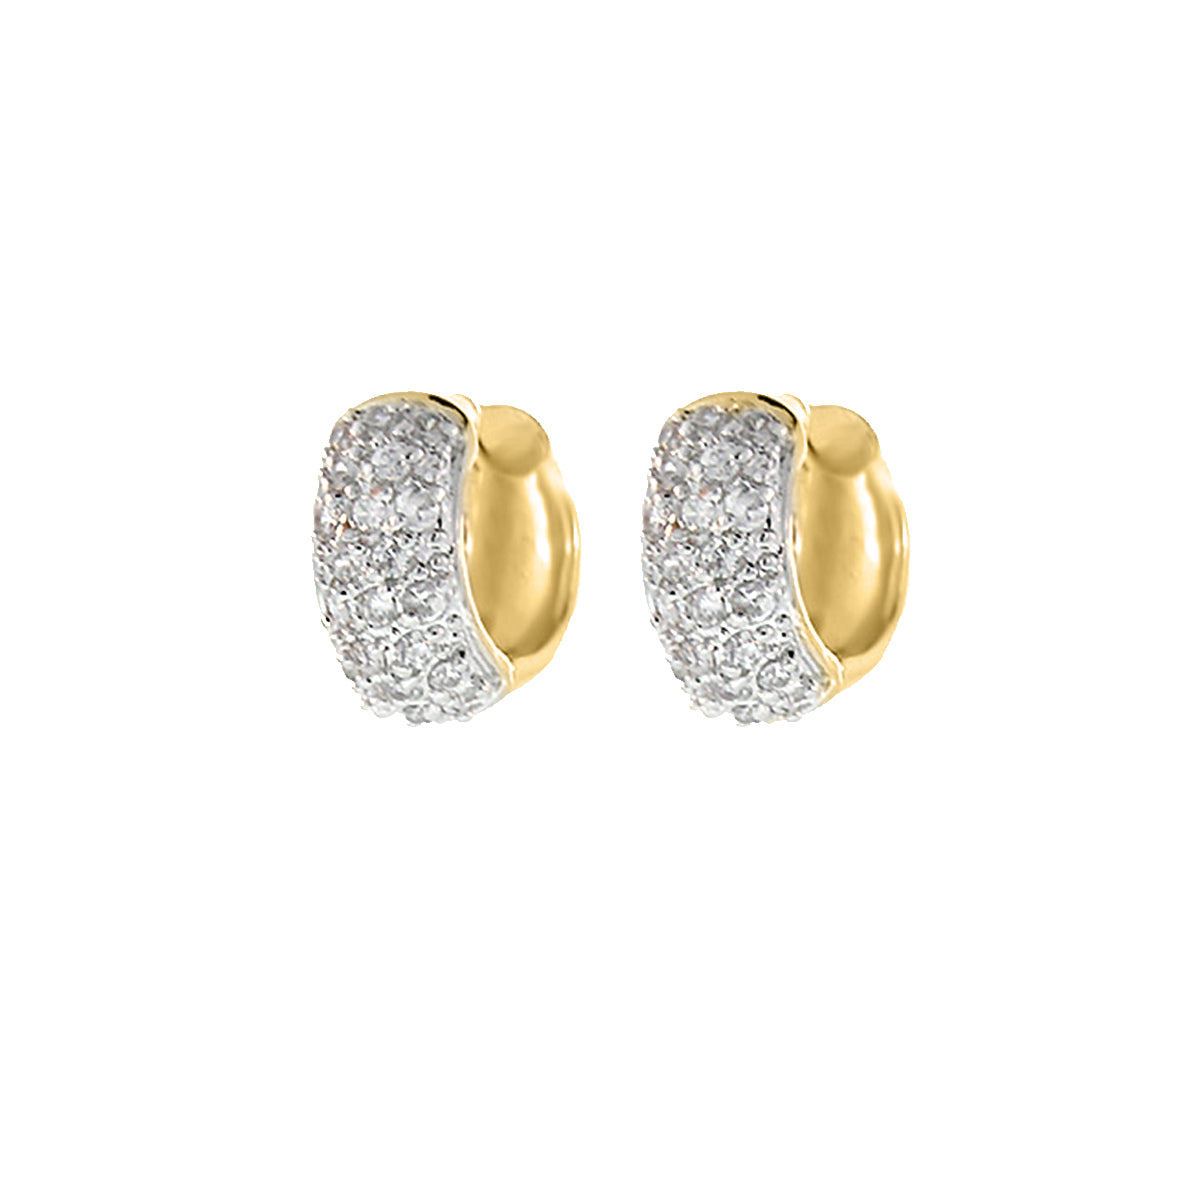 Glamour Pave Earrings